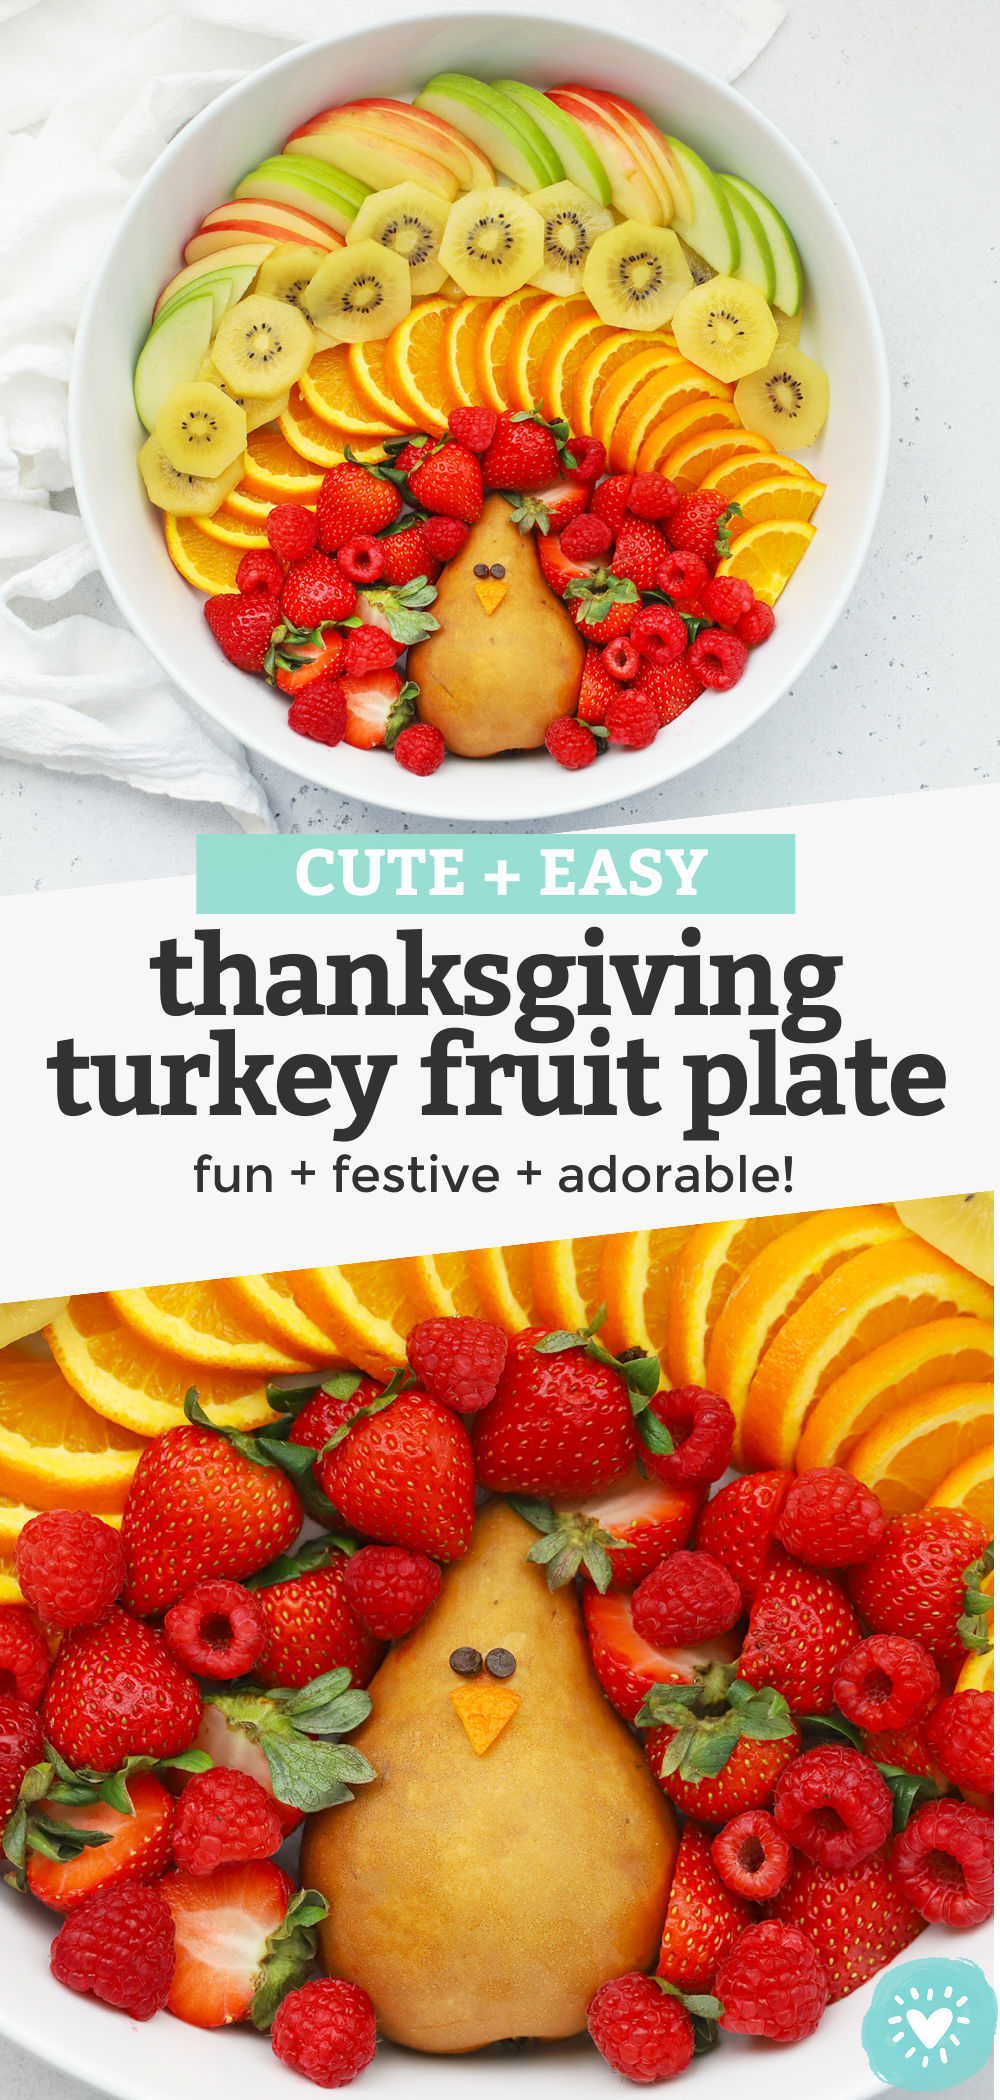 Thanksgiving Turkey Fruit Plate - This turkey-shaped Thanksgiving fruit platter looks adorable at holiday get-togethers and parties. It's a favorite with kids and grown-ups alike! (Naturally gluten-free, vegan & paleo) // Thanksgiving Appetizer // Thanksgiving Snack // Thanksgiving Fruit Platter // Turkey Fruit Platter // Fall Appetizer // #paleo #vegan #thanksgiving #appetizer #turkey #fruitplate #fruitplatter #healthysnack